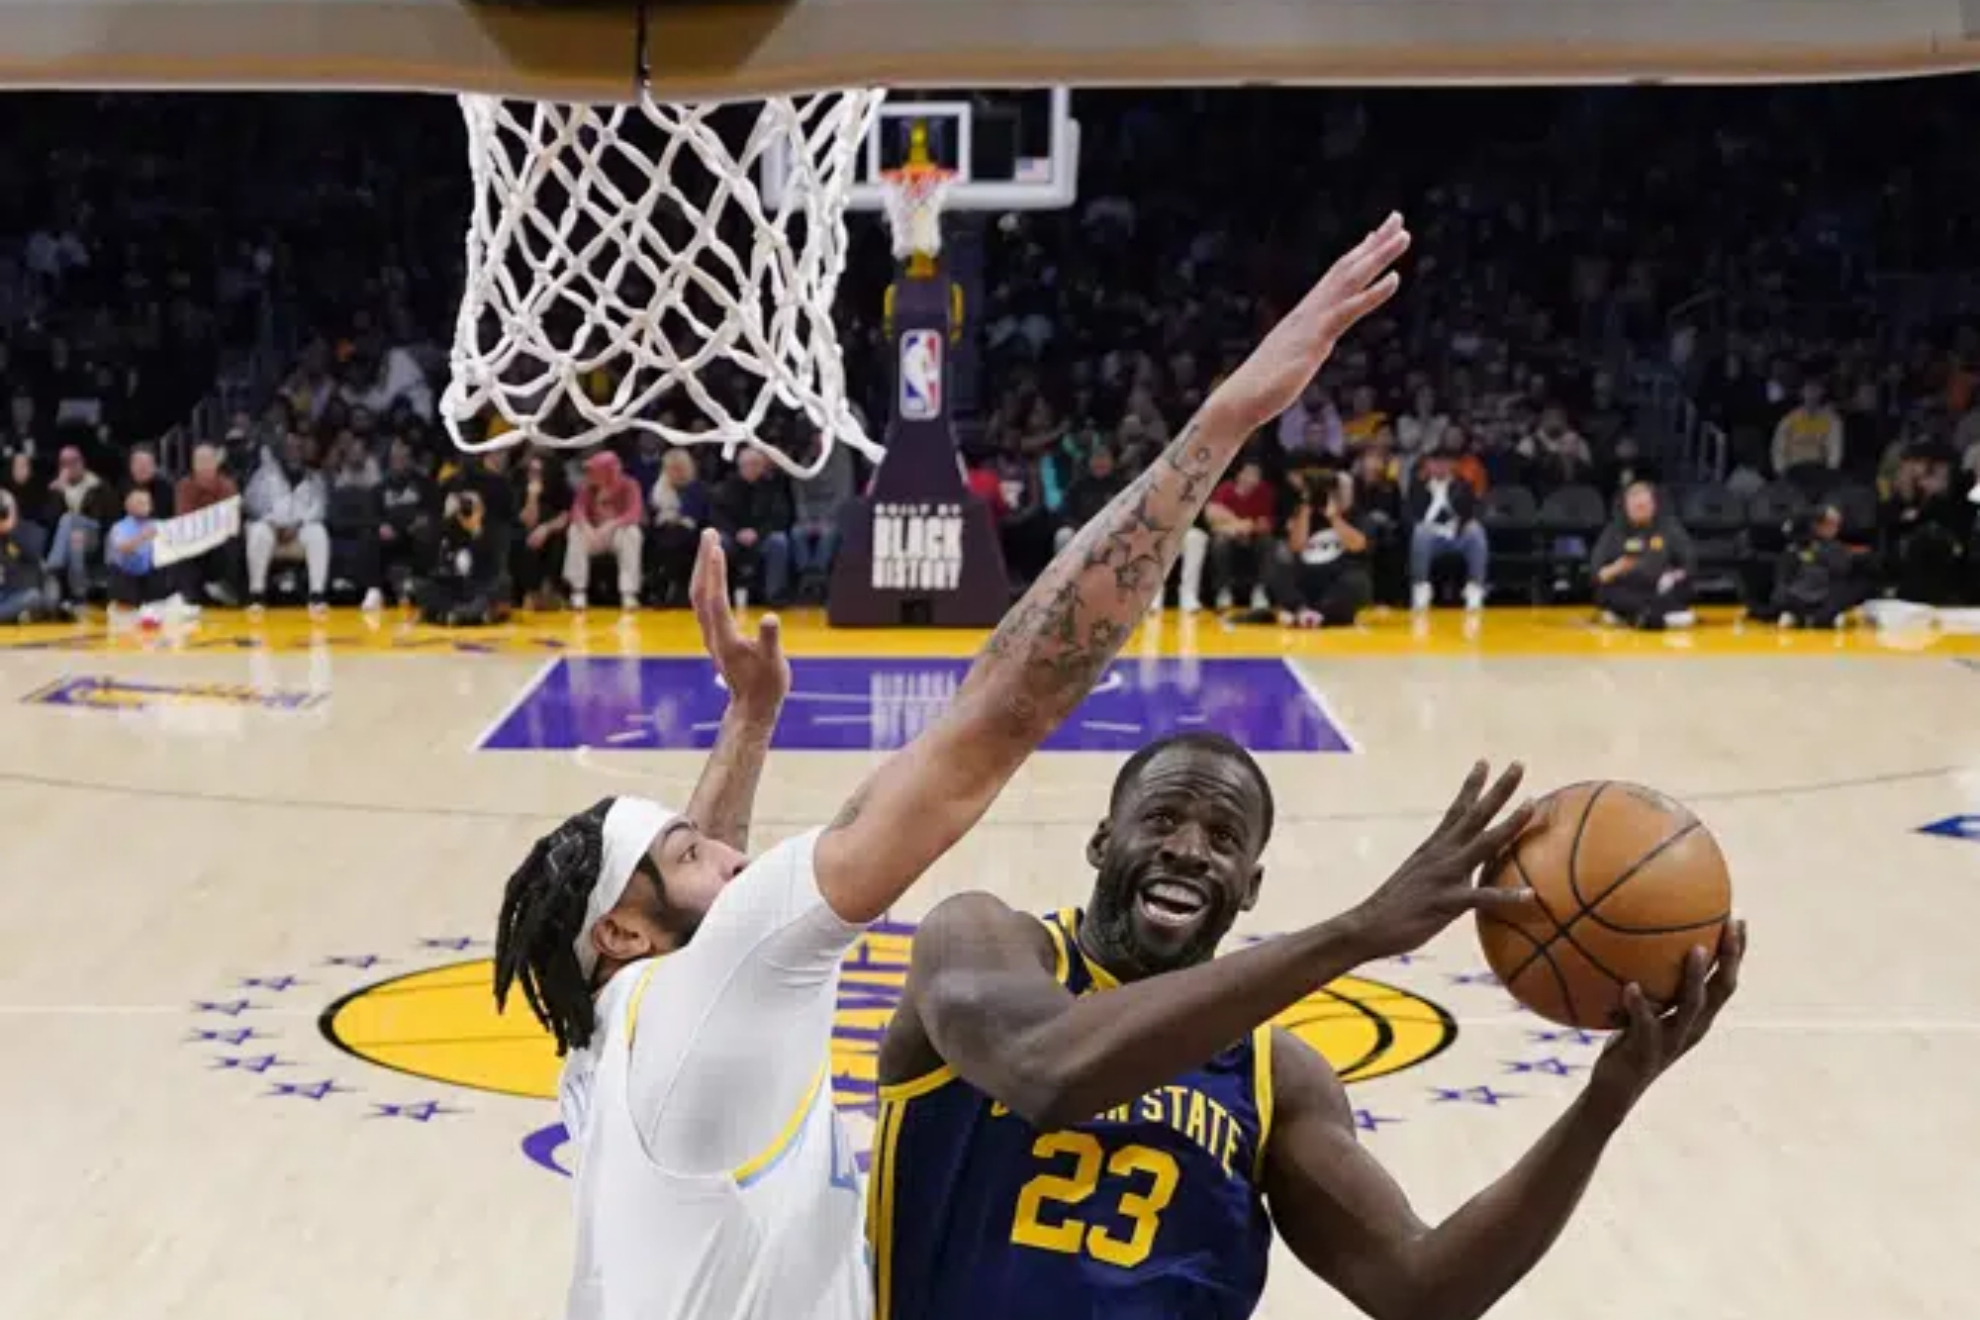 The Warriors will visit the Lakers for the second time in the past two weeks.